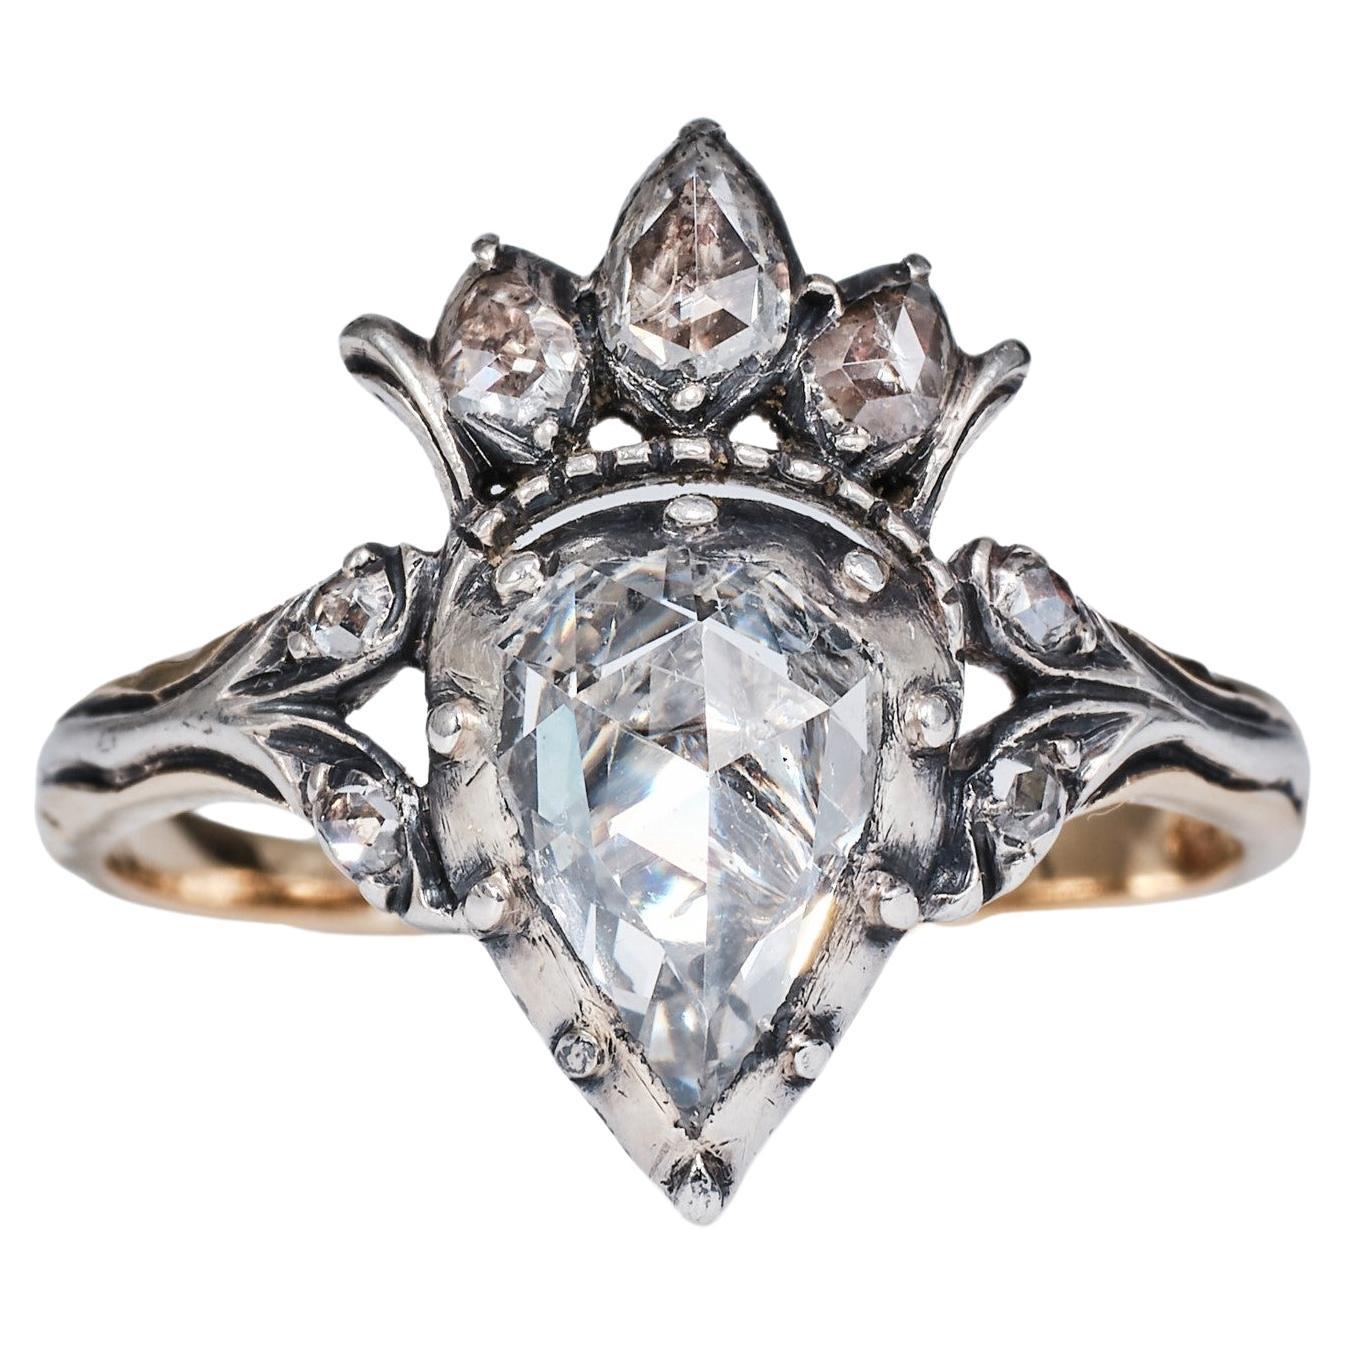 Georgian crowned diamond heart ring from turn of the century 18th/19th century.